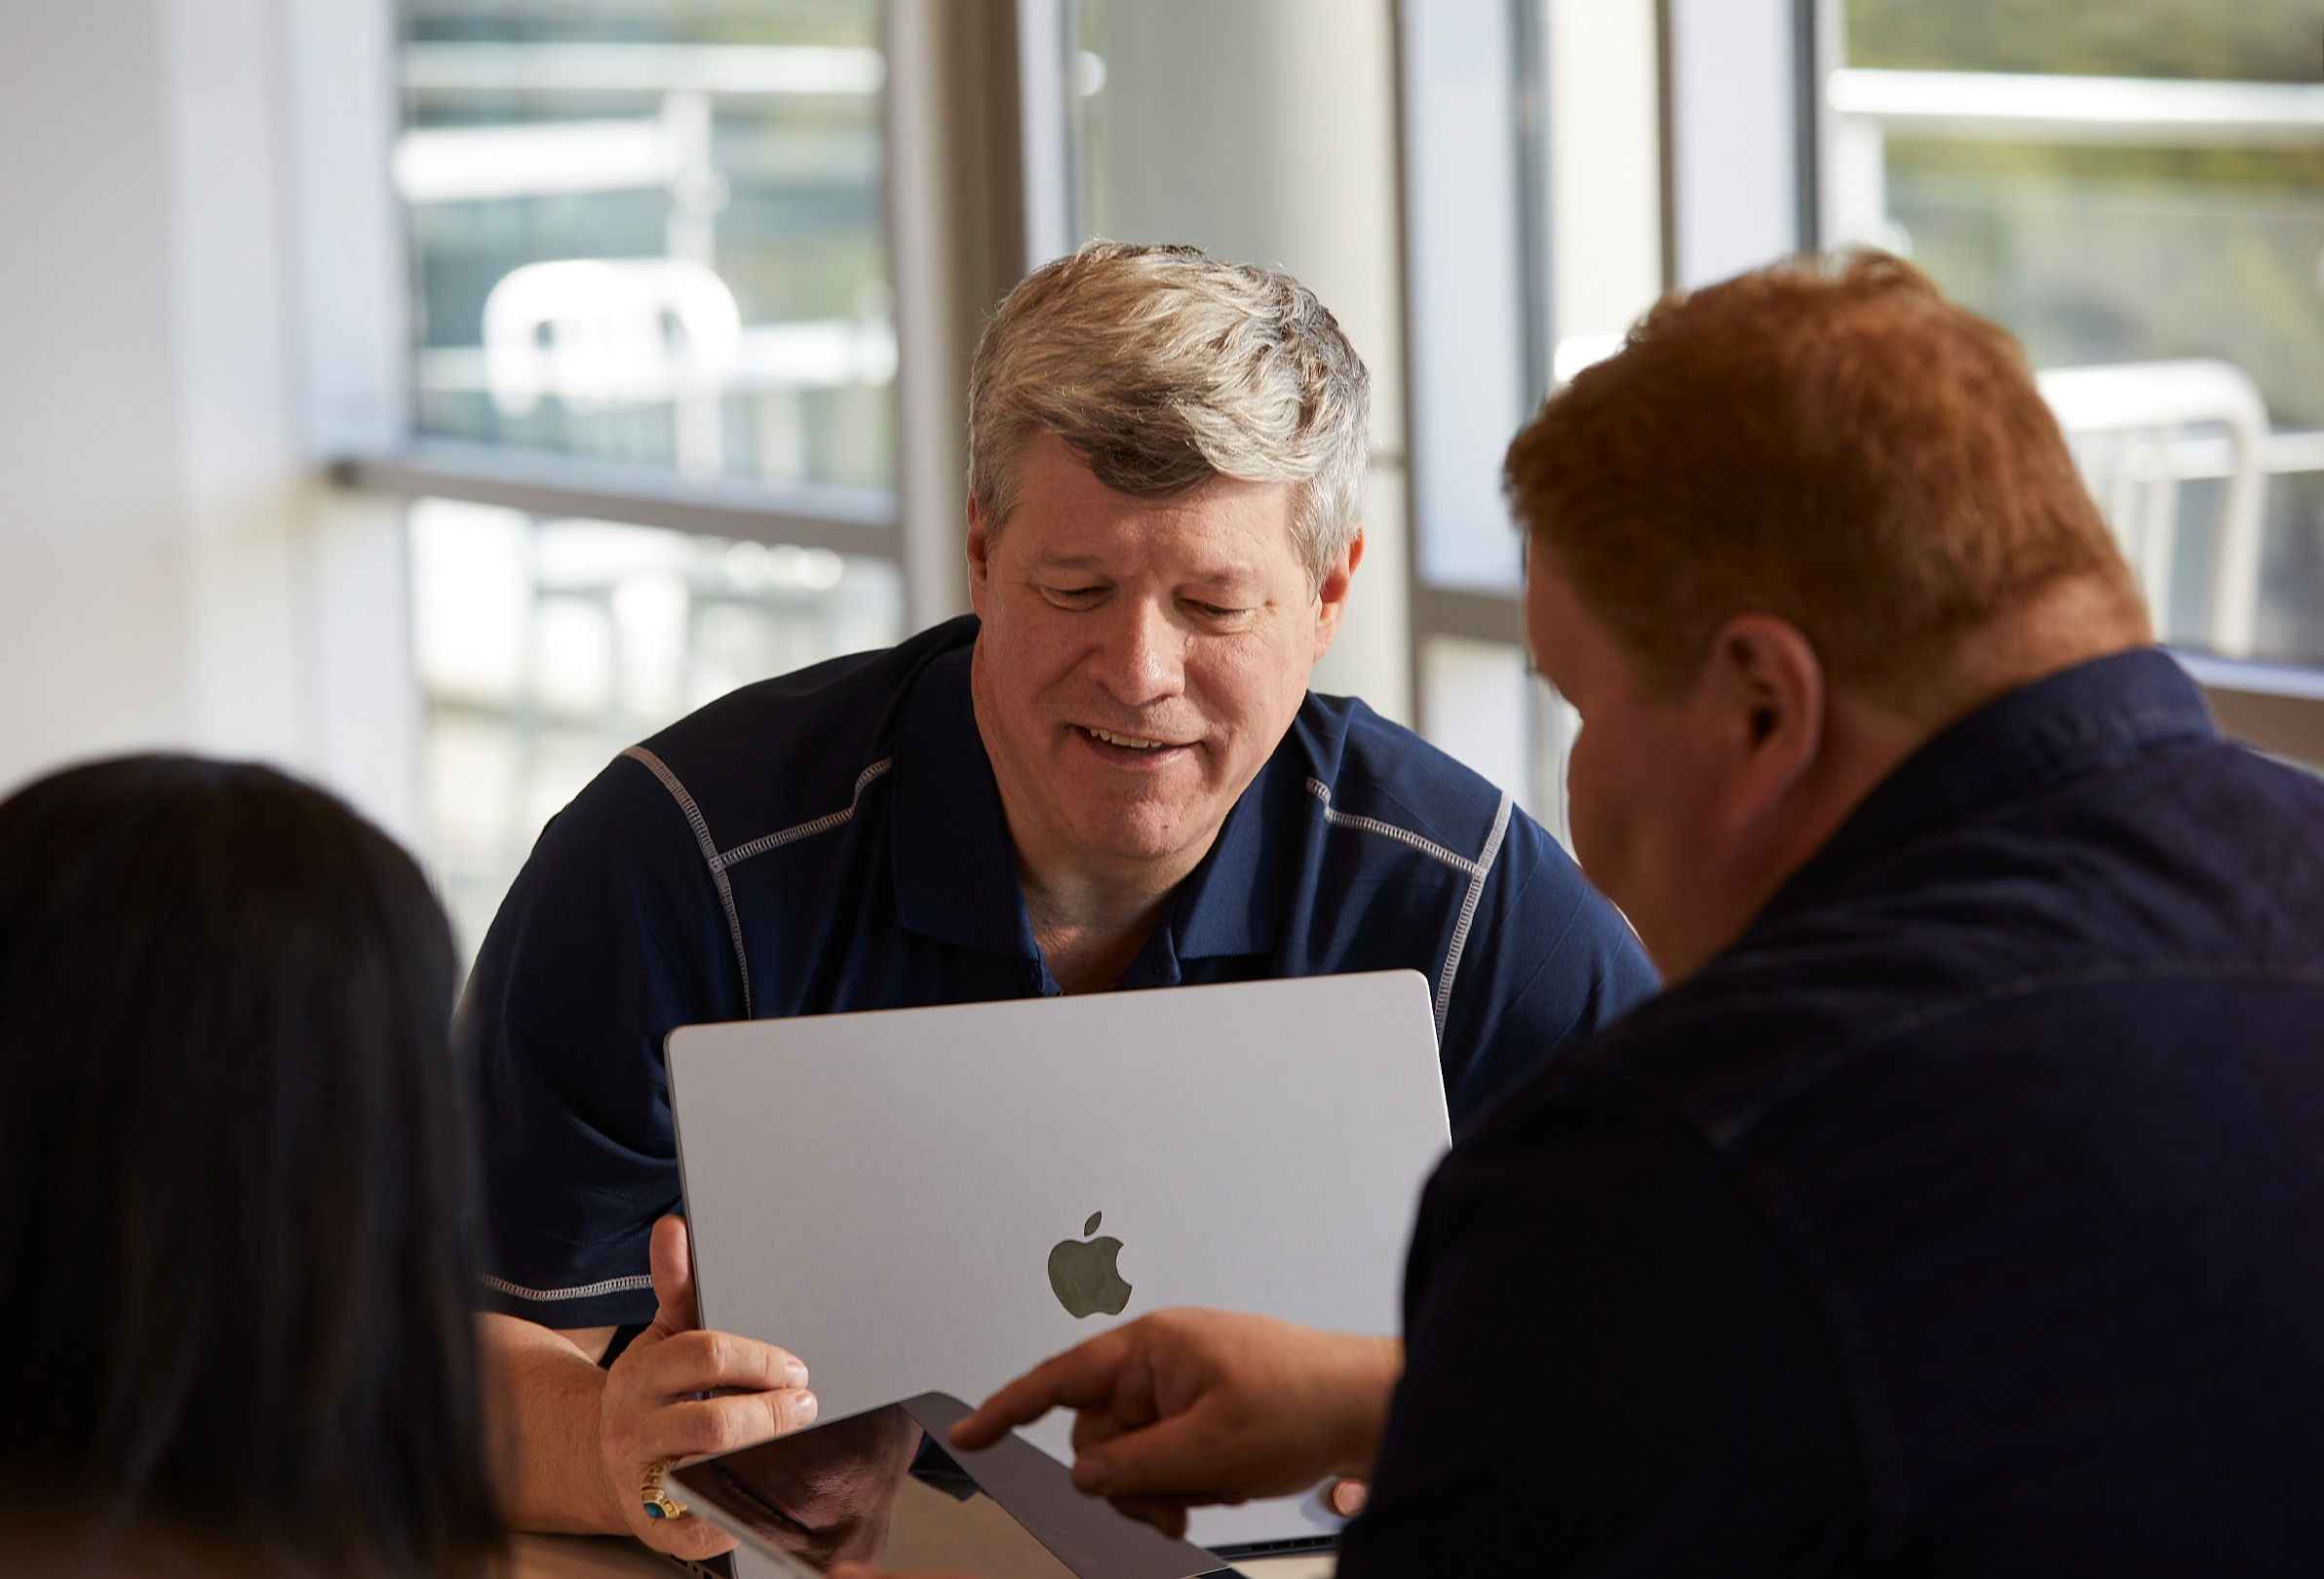 Three Apple employees using a MacBook and iPad to collaborate.